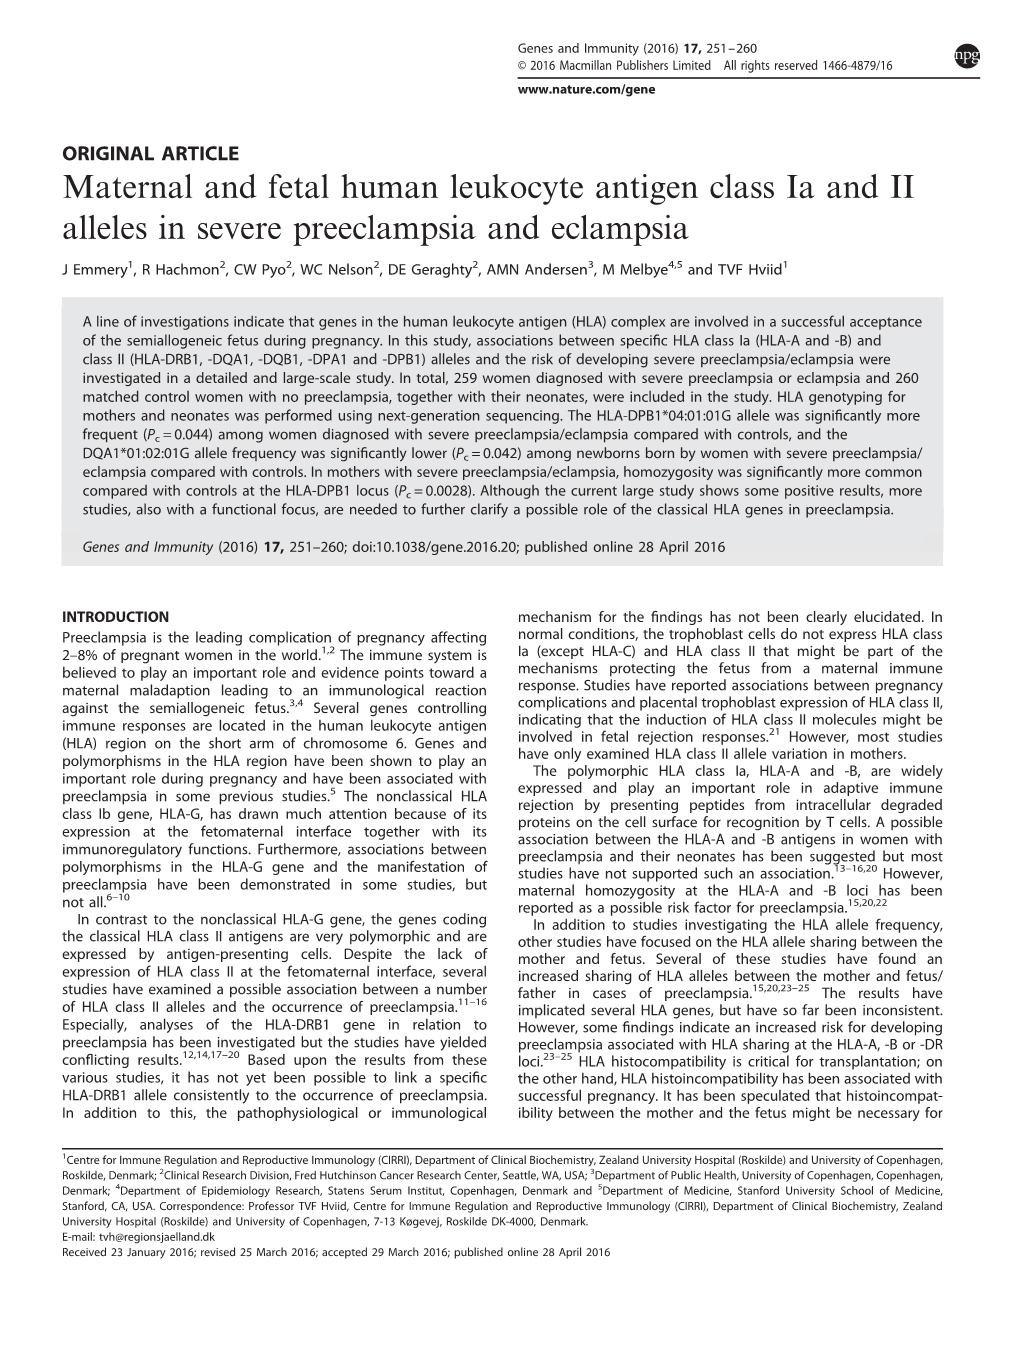 Maternal and Fetal Human Leukocyte Antigen Class Ia and II Alleles in Severe Preeclampsia and Eclampsia